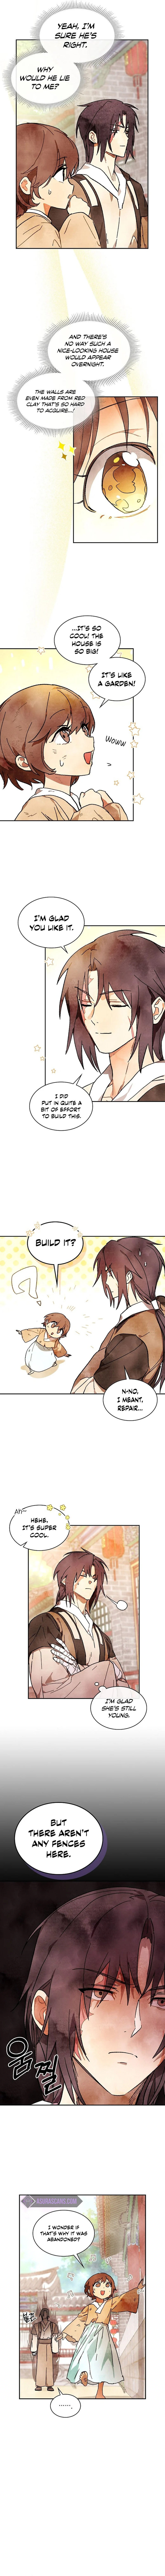 chronicles-of-the-martial-gods-return-chap-3-2